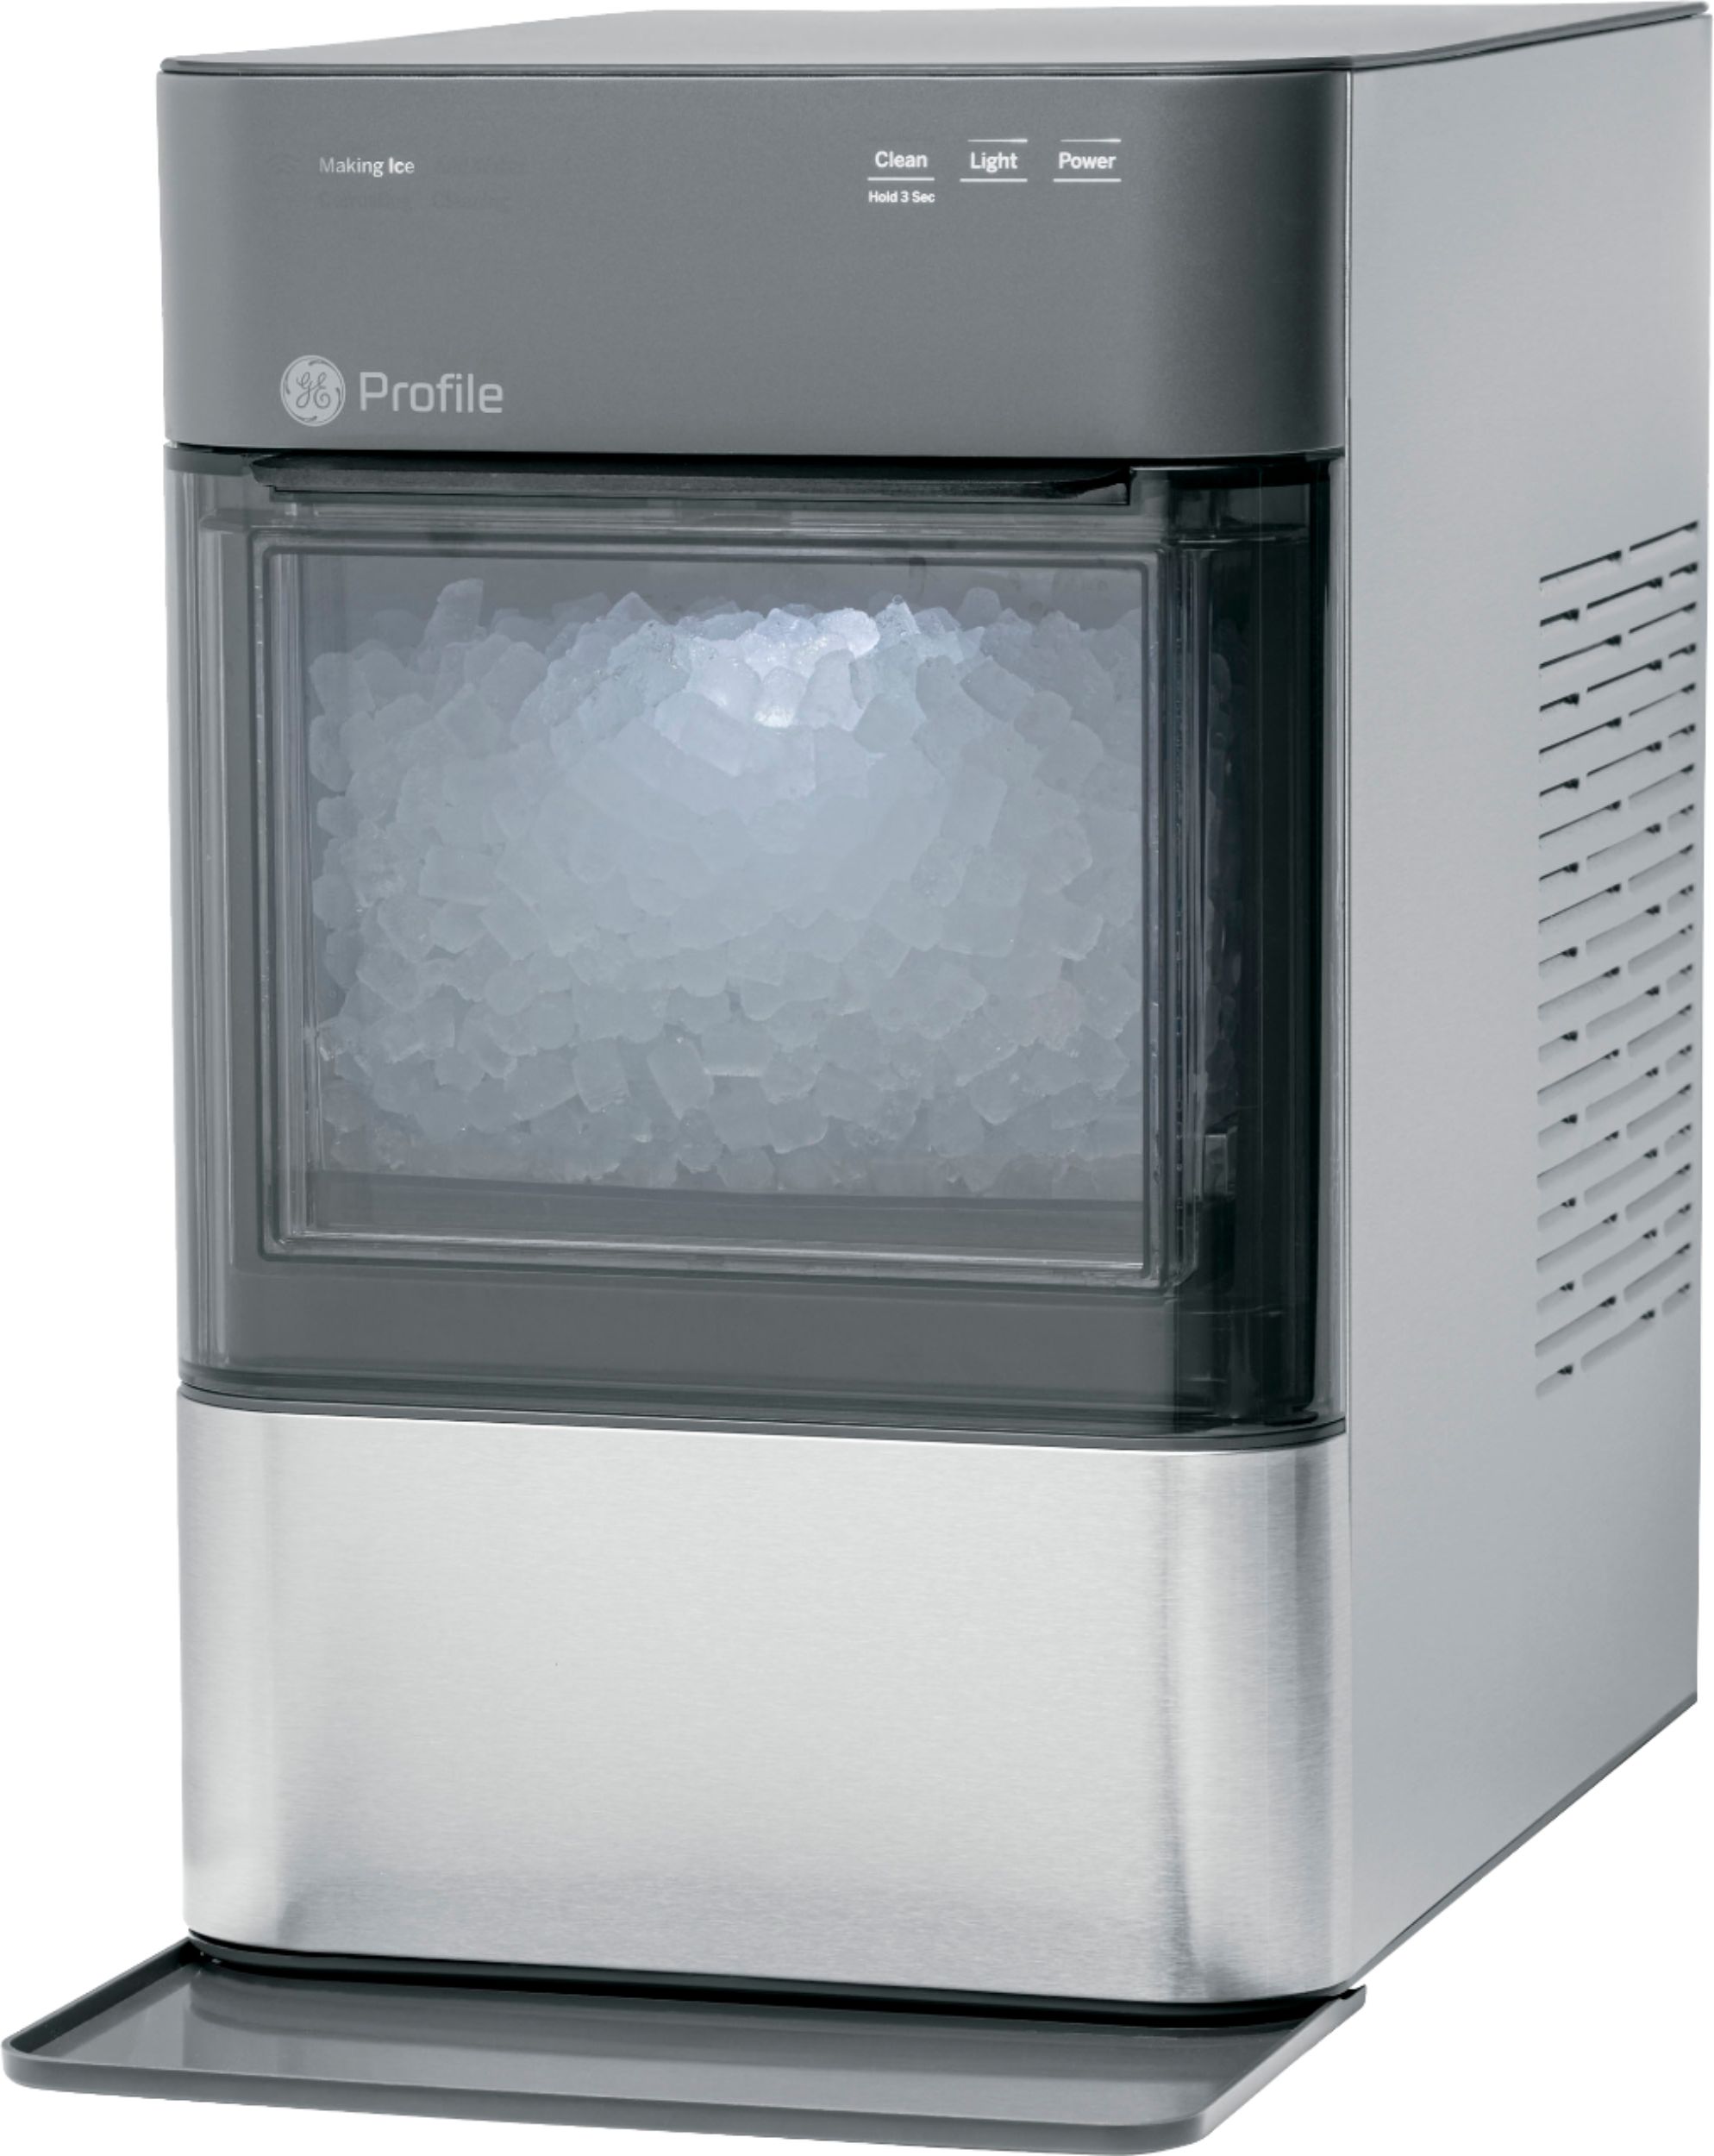 Keenstar Nugget Ice Maker Countertop, 40lbs/24H, Pebble Ice Maker with Soft  Chewable Ice, Self Cleaning Sonic Ice Machine, Stainless Steel with Touch  Screen, Compact Design for Home Office Bar Party - Yahoo